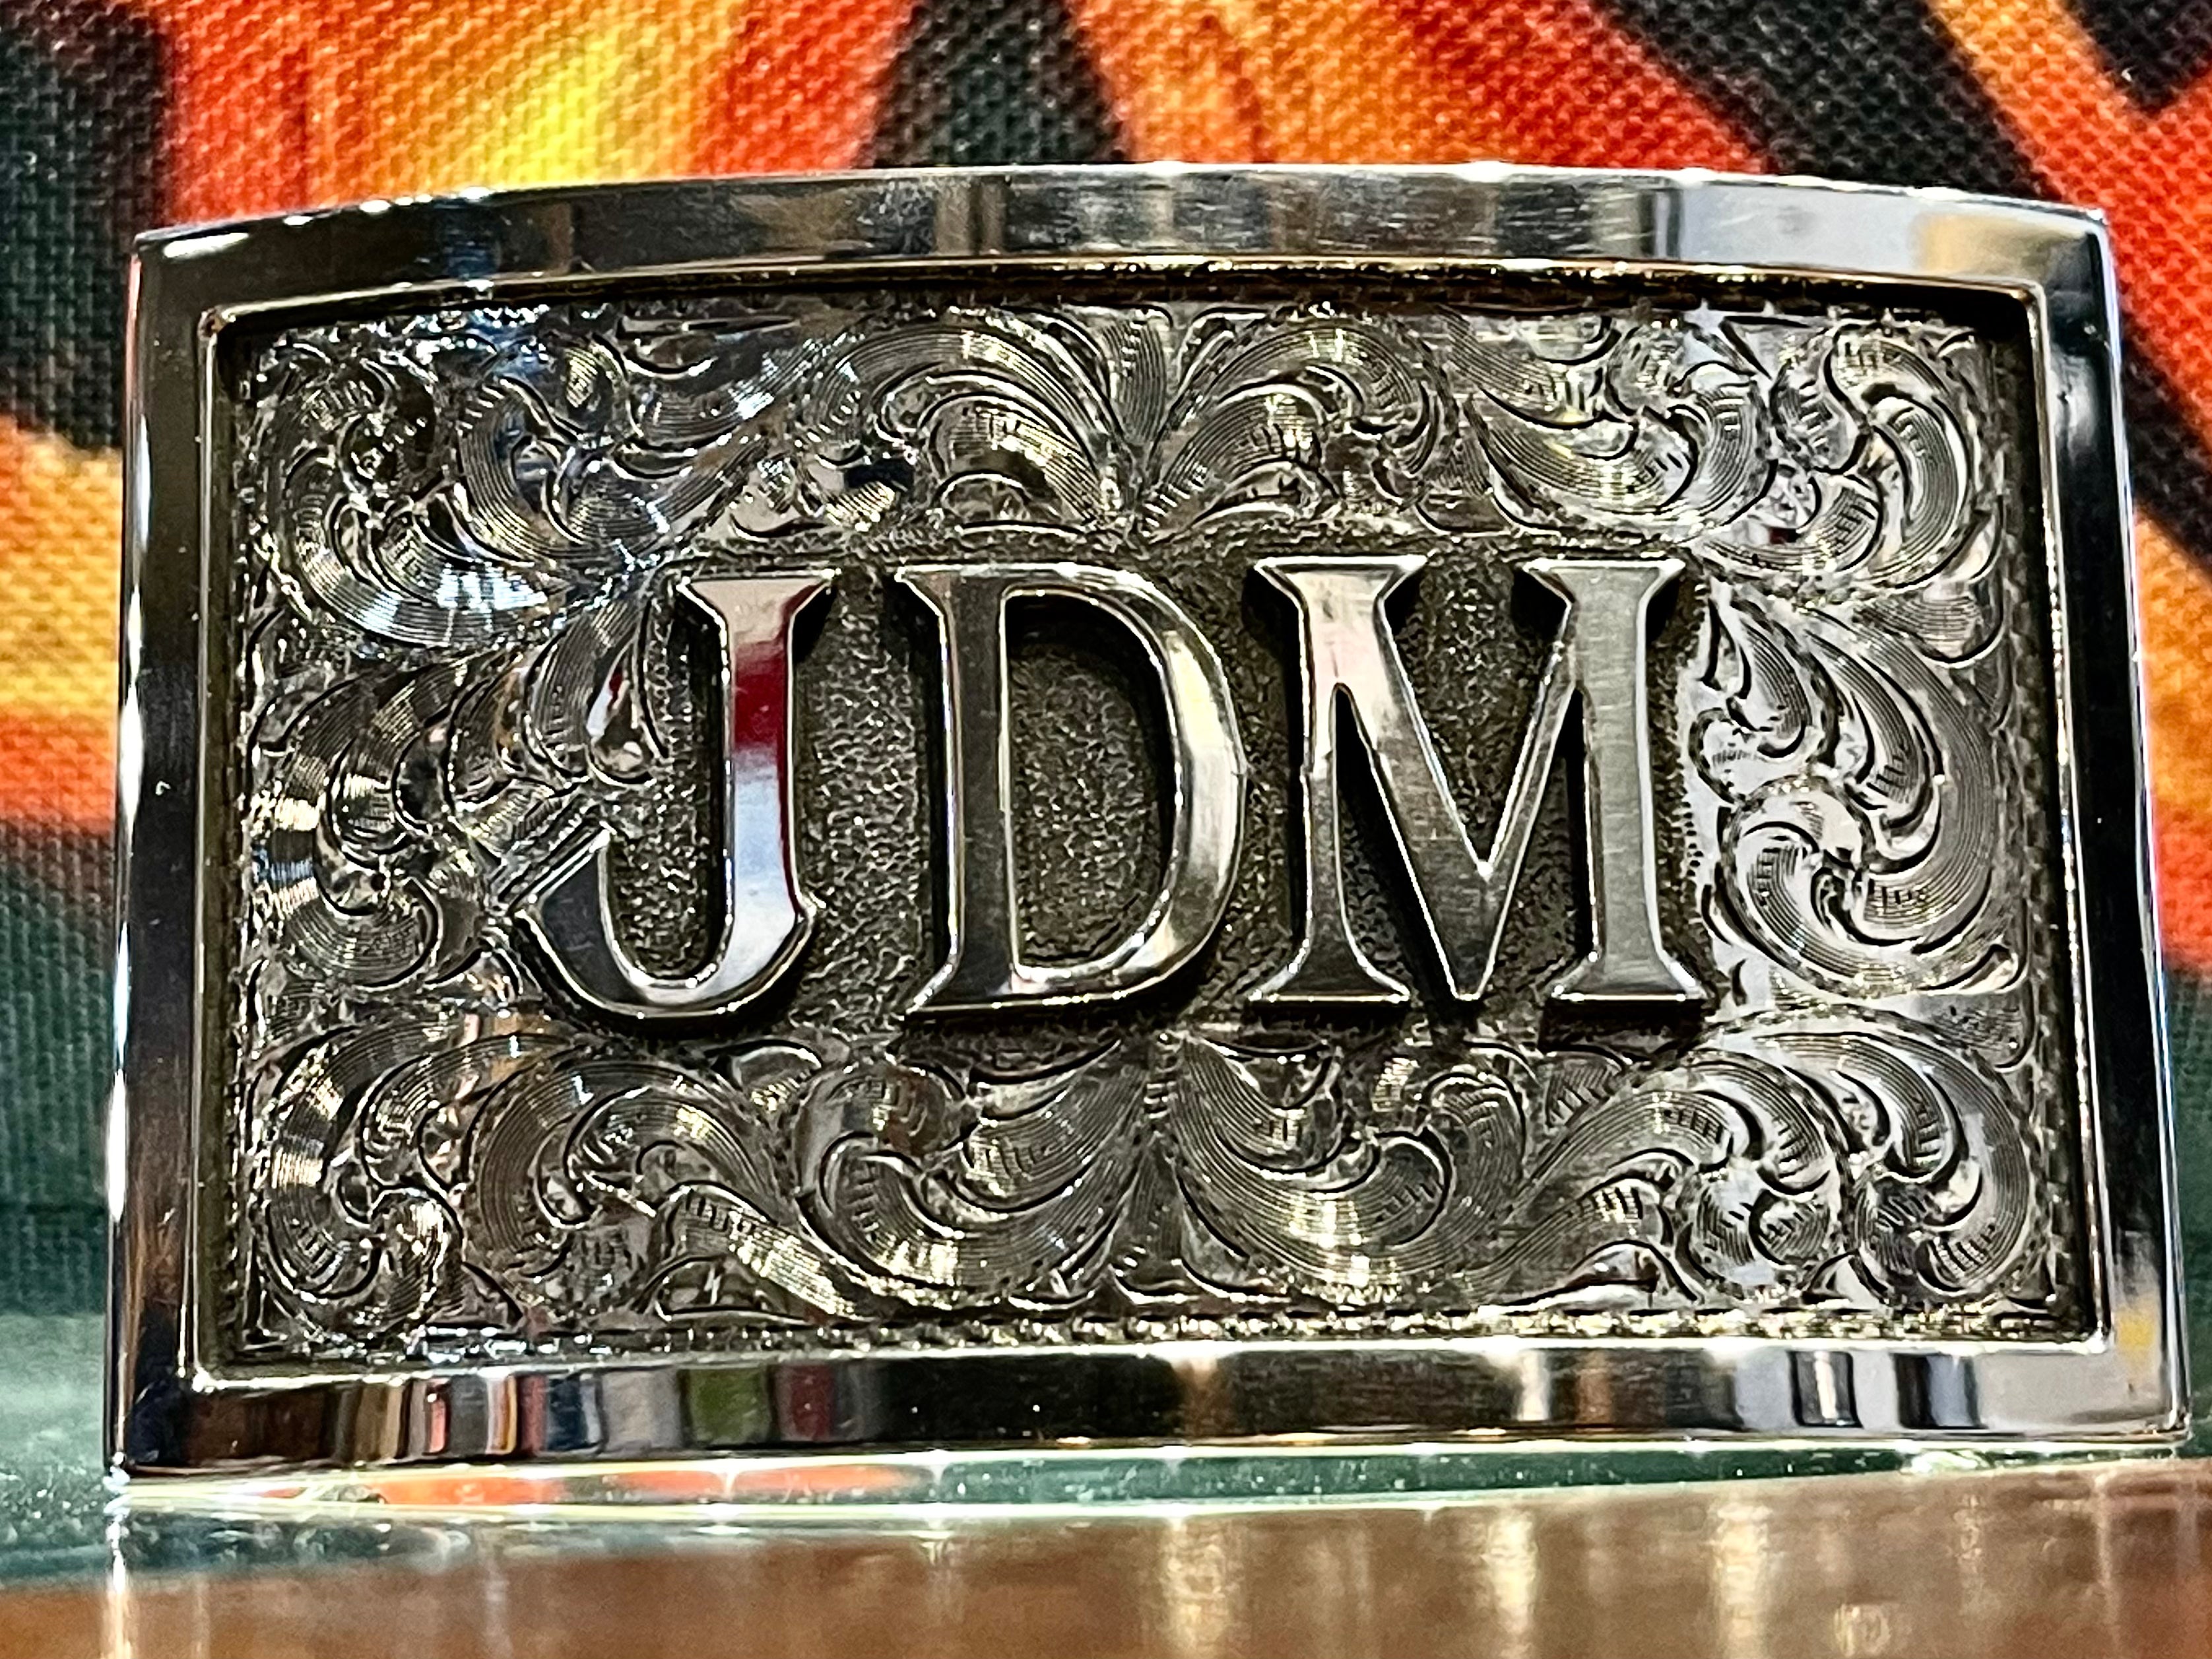 Custom Buckle with Initials - Solid Silver